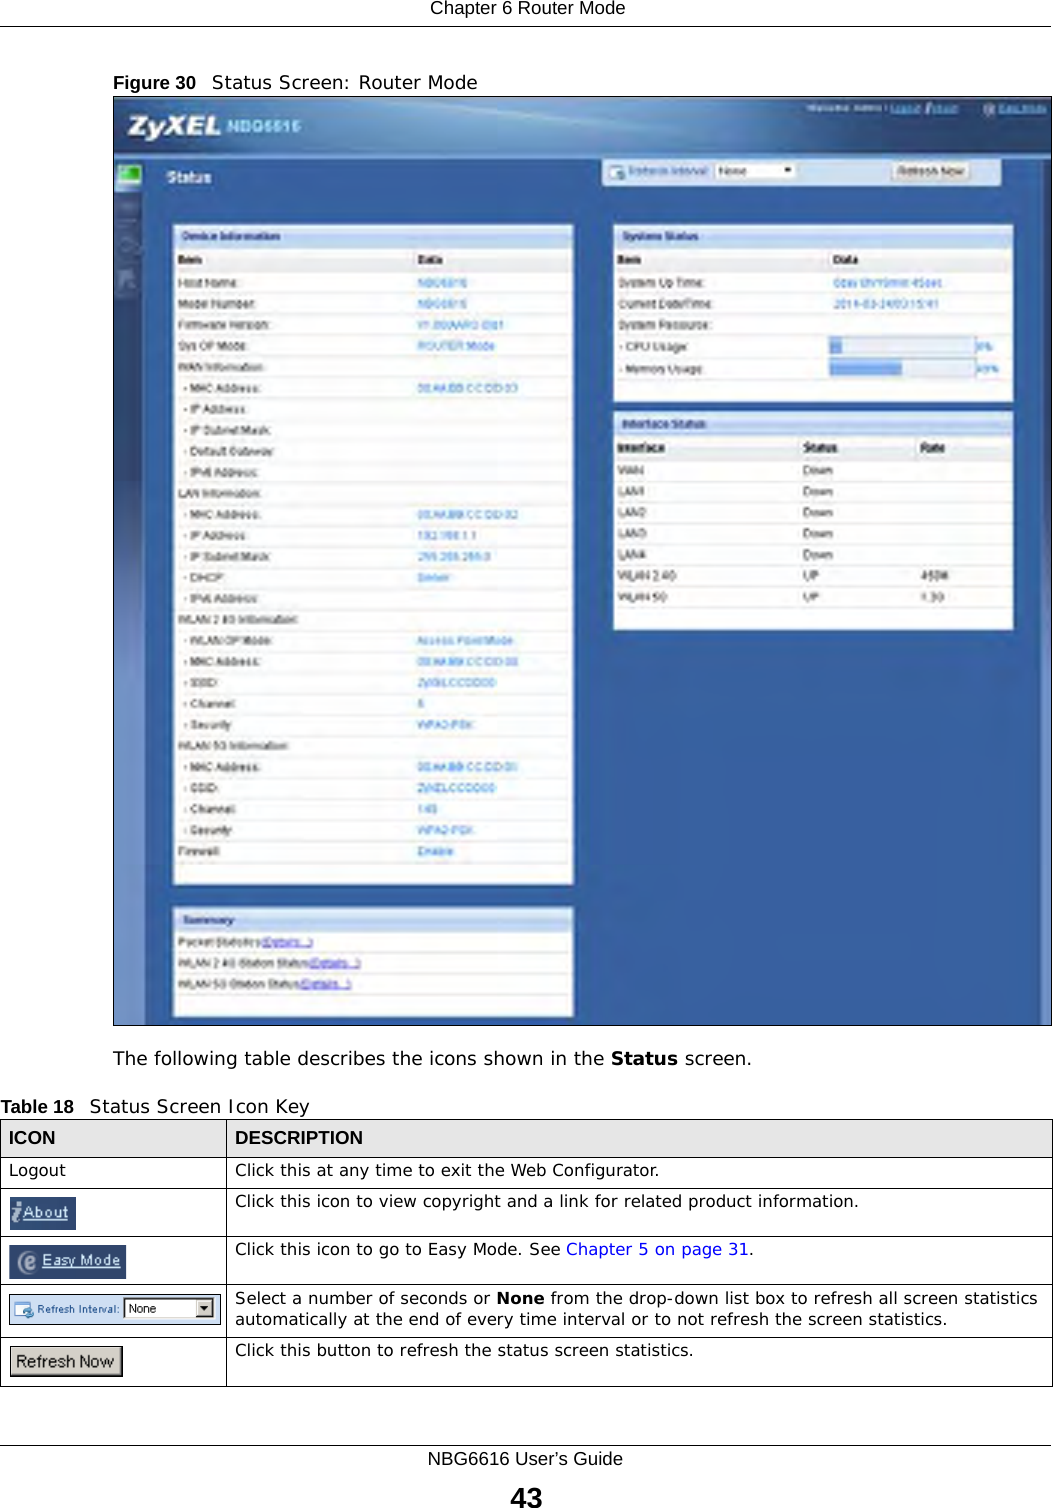  Chapter 6 Router ModeNBG6616 User’s Guide43Figure 30   Status Screen: Router Mode The following table describes the icons shown in the Status screen.Table 18   Status Screen Icon KeyICON DESCRIPTIONLogout Click this at any time to exit the Web Configurator.Click this icon to view copyright and a link for related product information.Click this icon to go to Easy Mode. See Chapter 5 on page 31.Select a number of seconds or None from the drop-down list box to refresh all screen statistics automatically at the end of every time interval or to not refresh the screen statistics.Click this button to refresh the status screen statistics.